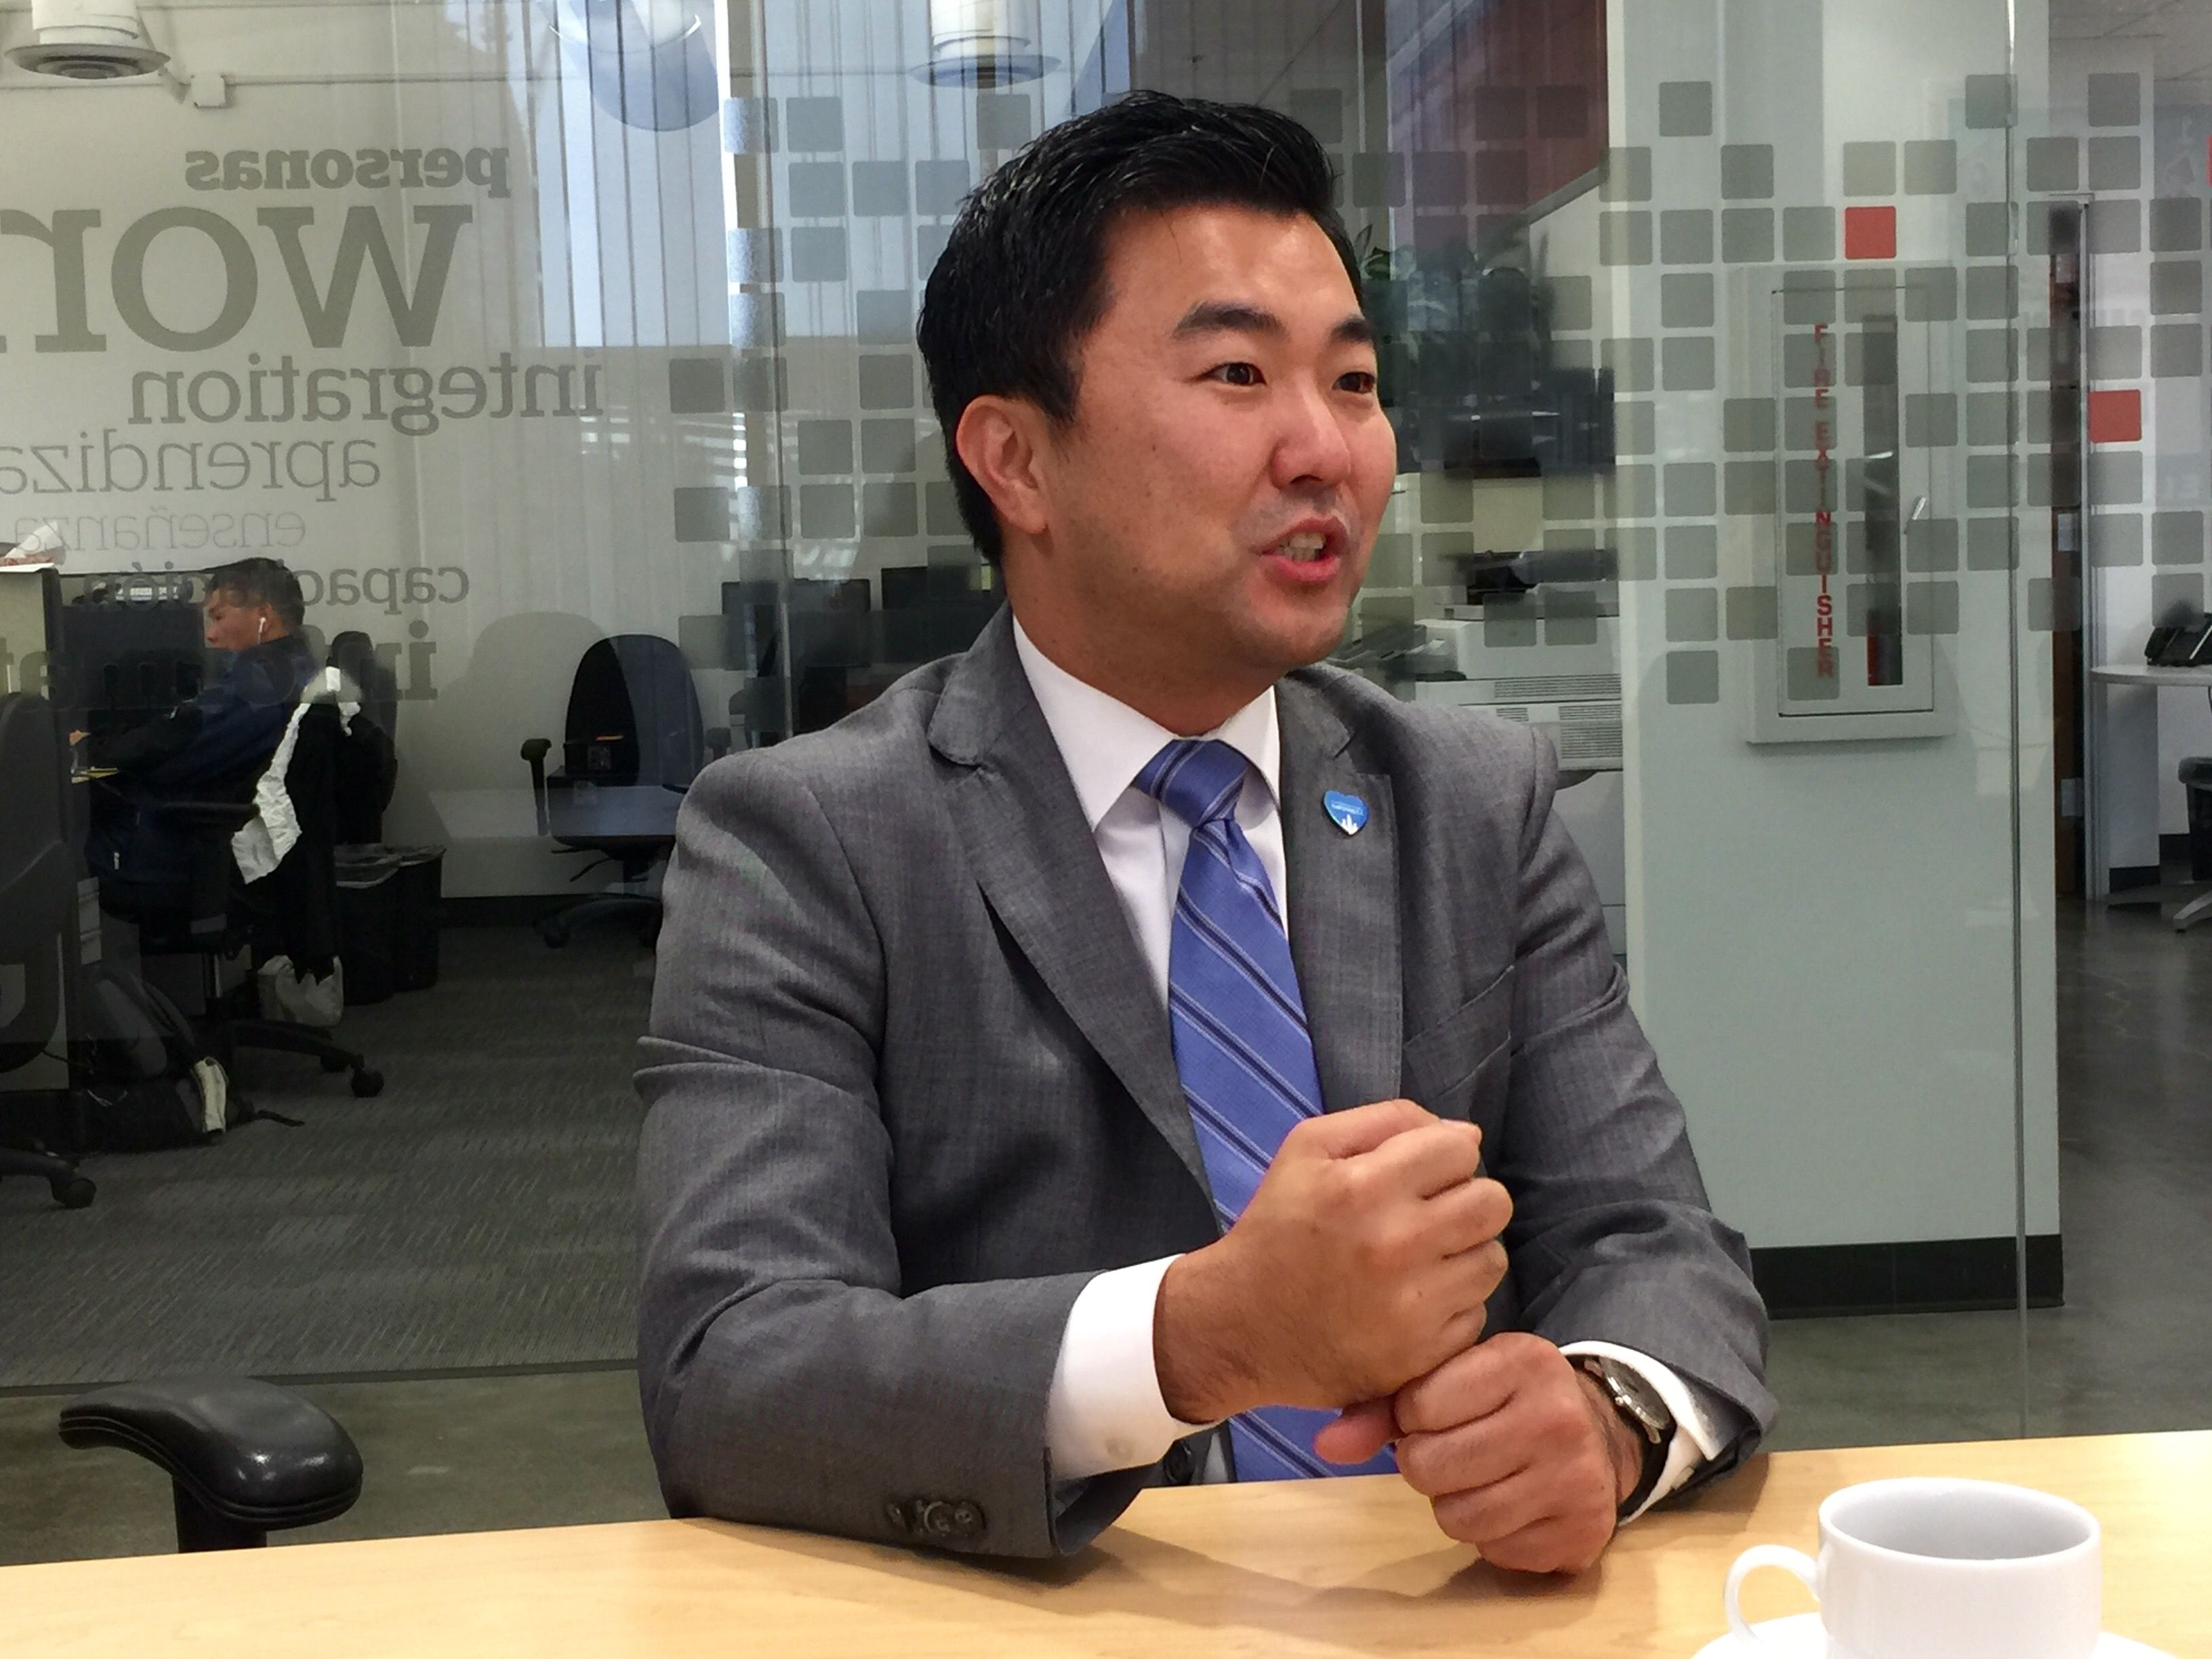 During a visit to La Opinion, Councilor David Ryu spoke about his proposal to create a savings account program so that parents can save for their children's education from the time they are in kindergarten.  (Araceli Martínez / La Opinion).